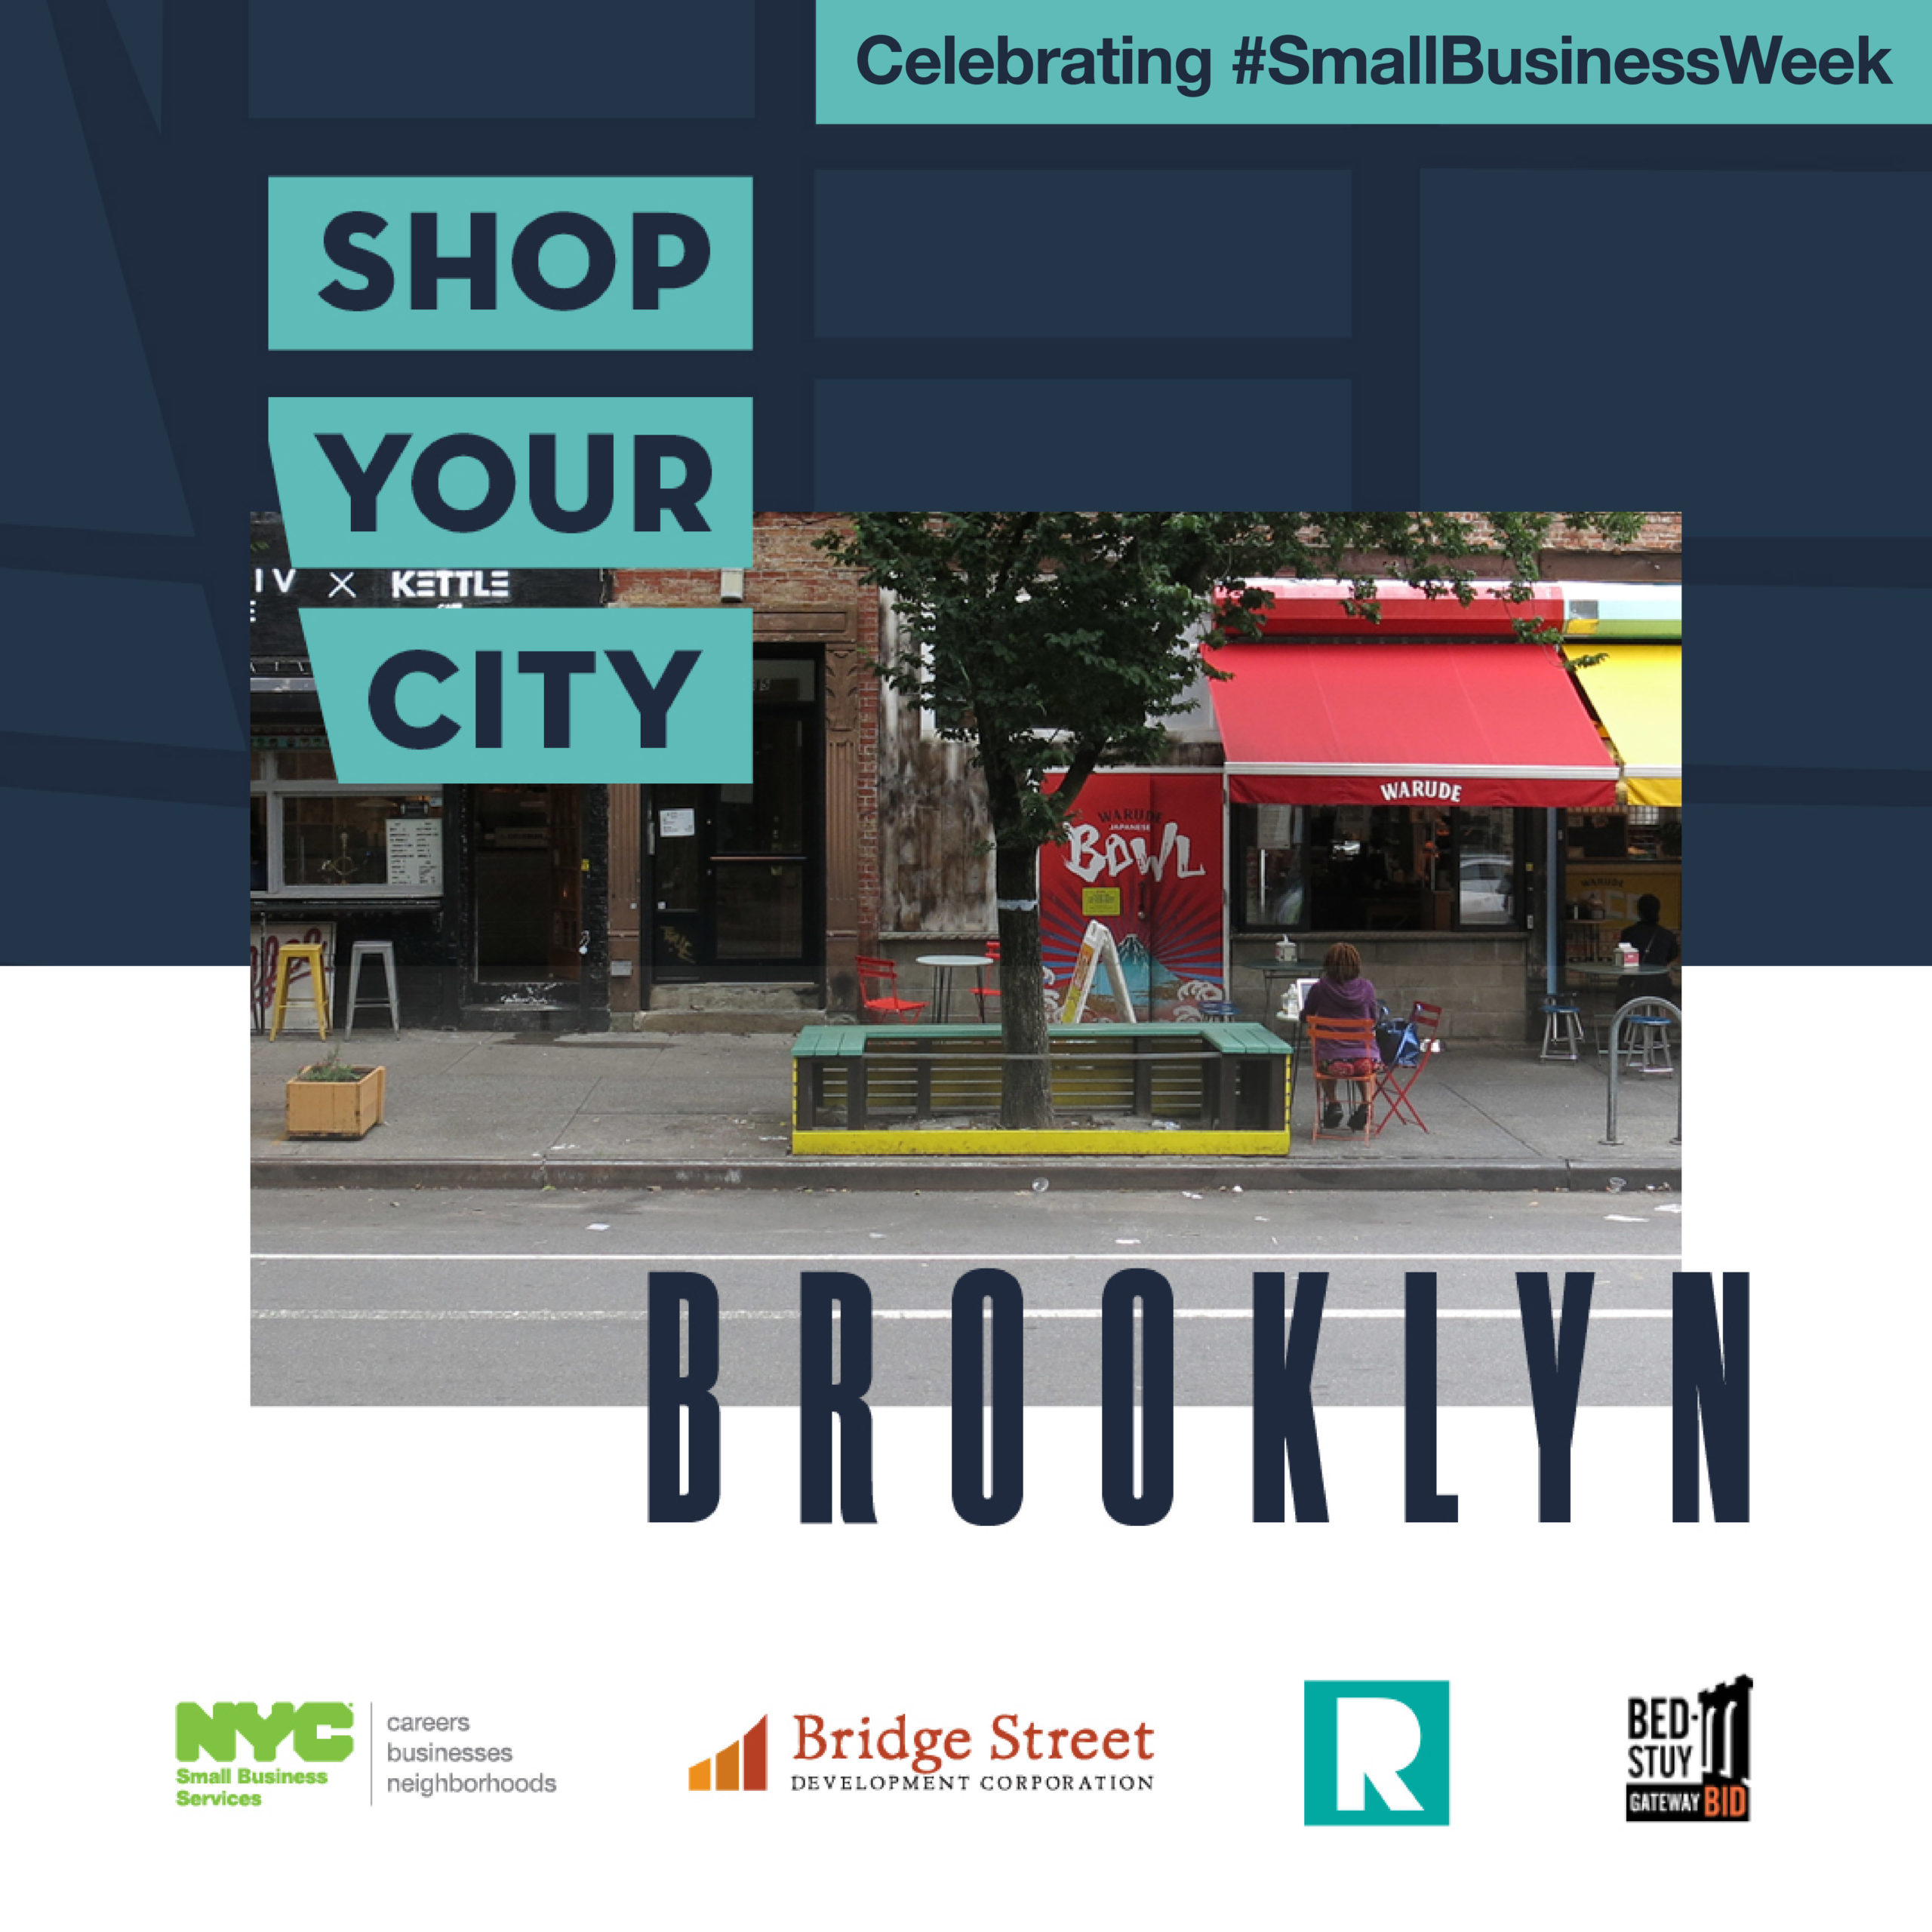 Commercial corridor on Tompkins Avenue in Brooklyn with Shop Your City Brooklyn graphic with SBS and partner logos